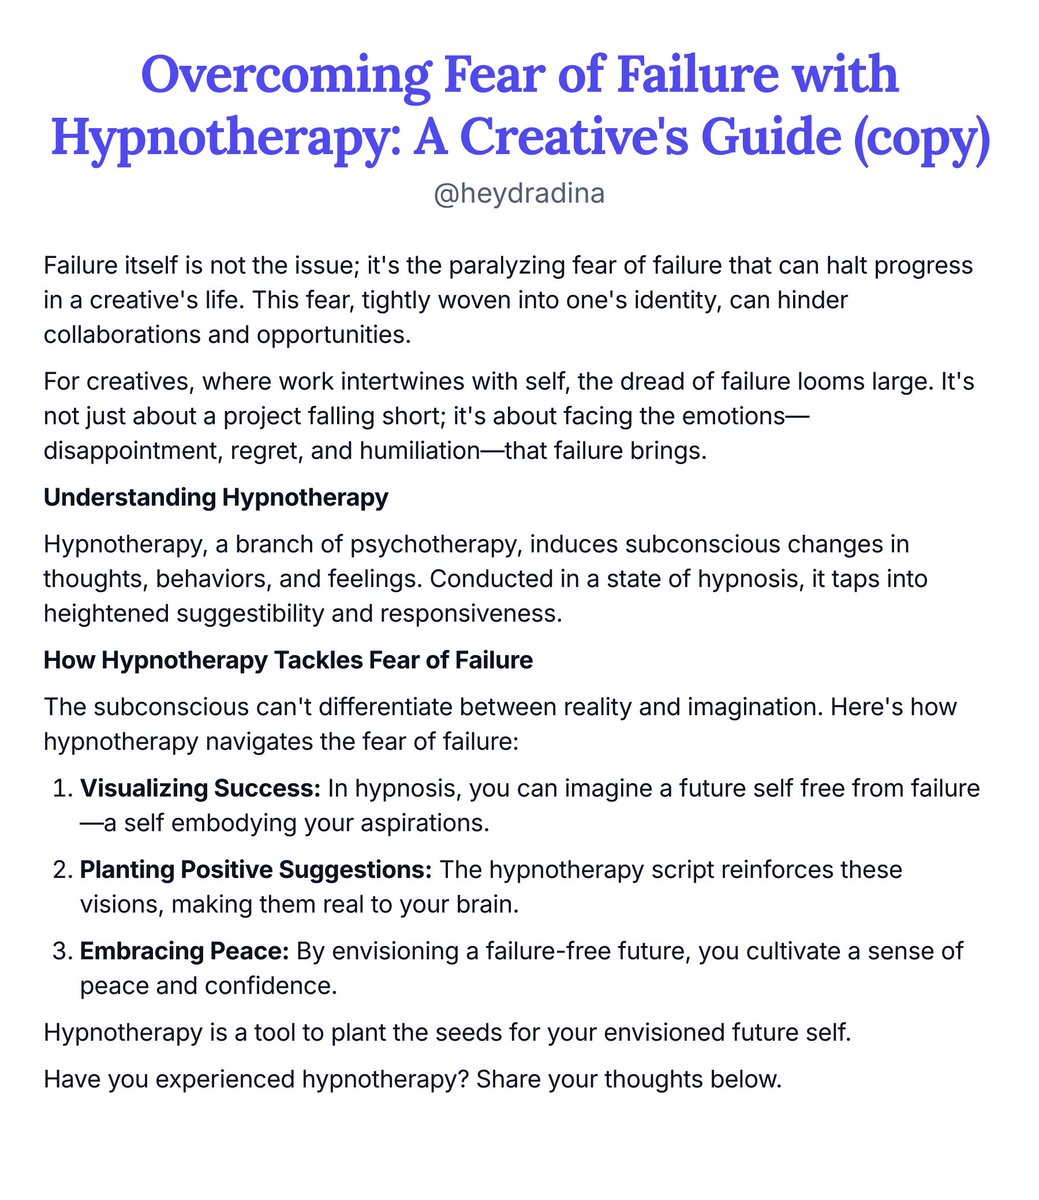 Overcoming Fear of Failure with Hypnotherapy: A Creative's Guide Failure itself is not the issue; it's the paralyzing fear of failure that can halt progress in a creative's life. #hypnotherapy #rapidchange #creatives